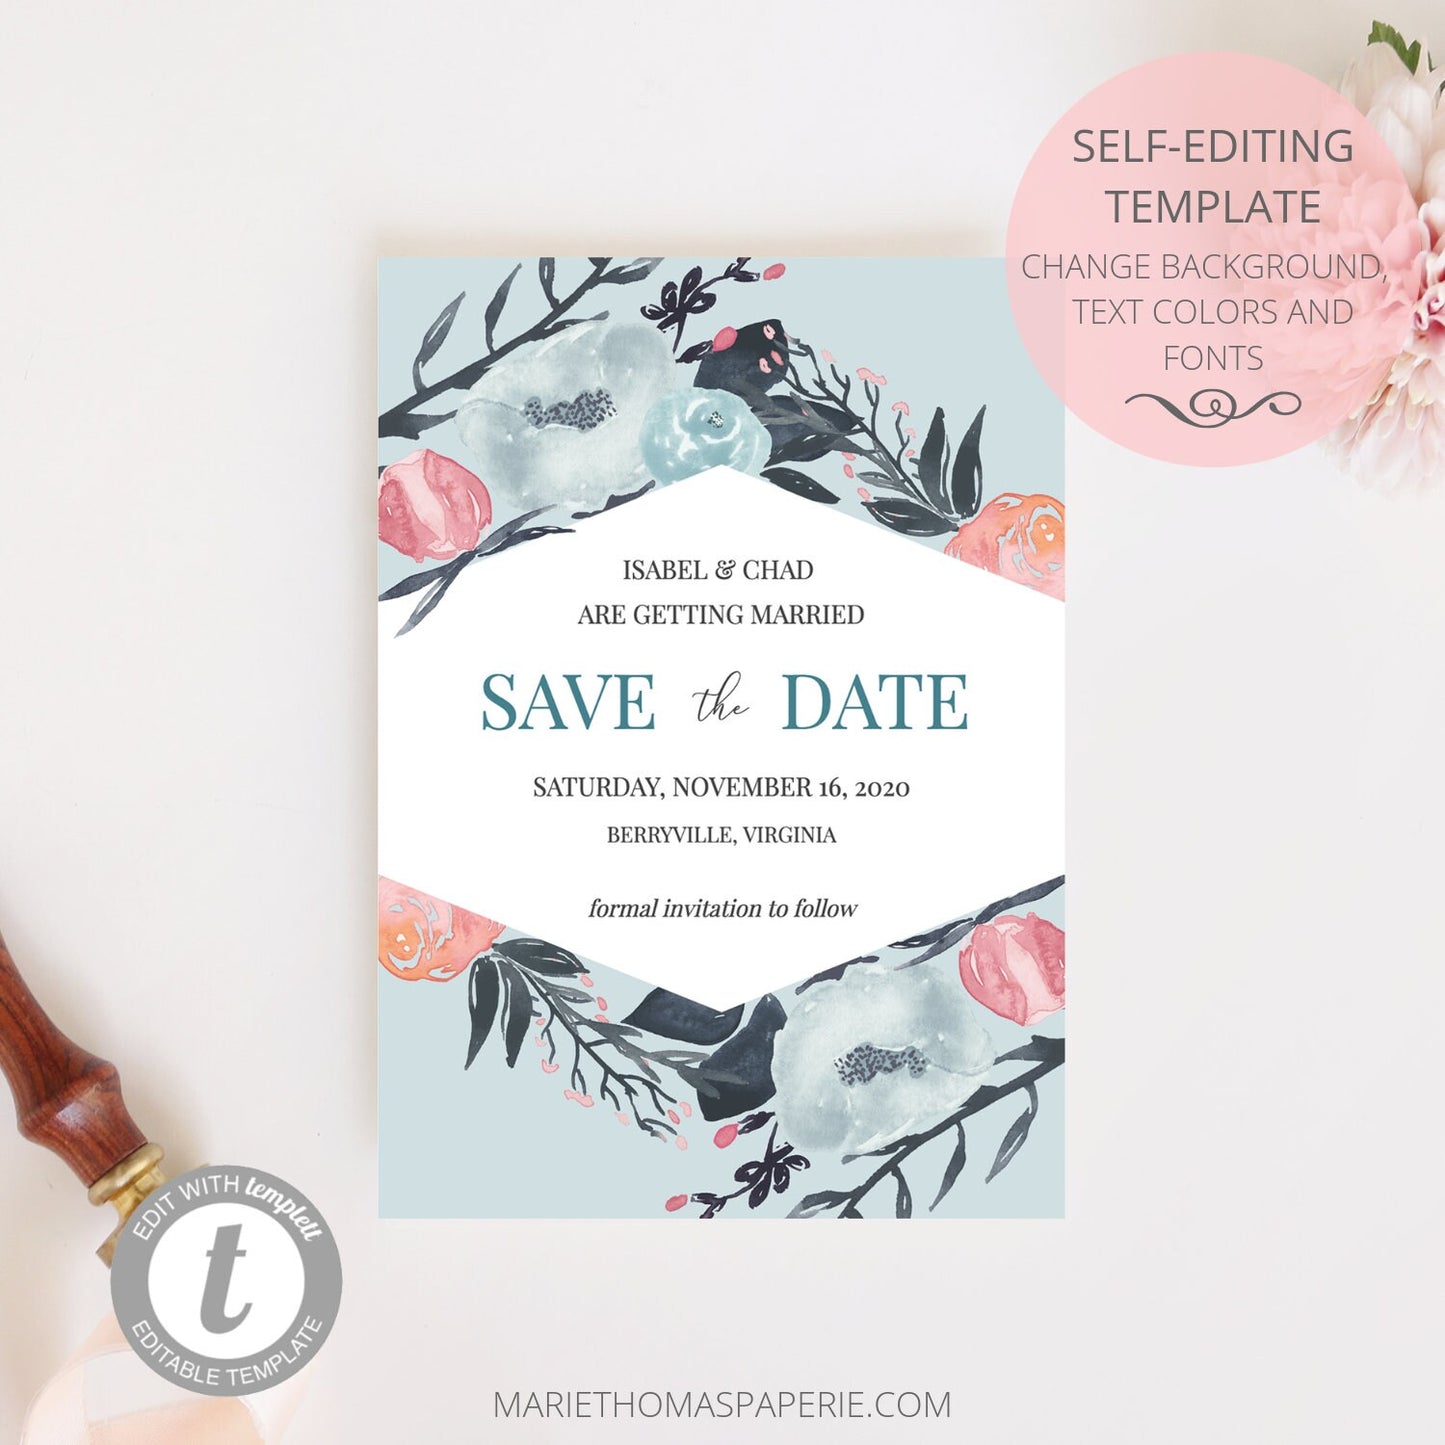 Editable Save the Date Wildflower Save the Date Cards Wedding Announcement Text Template